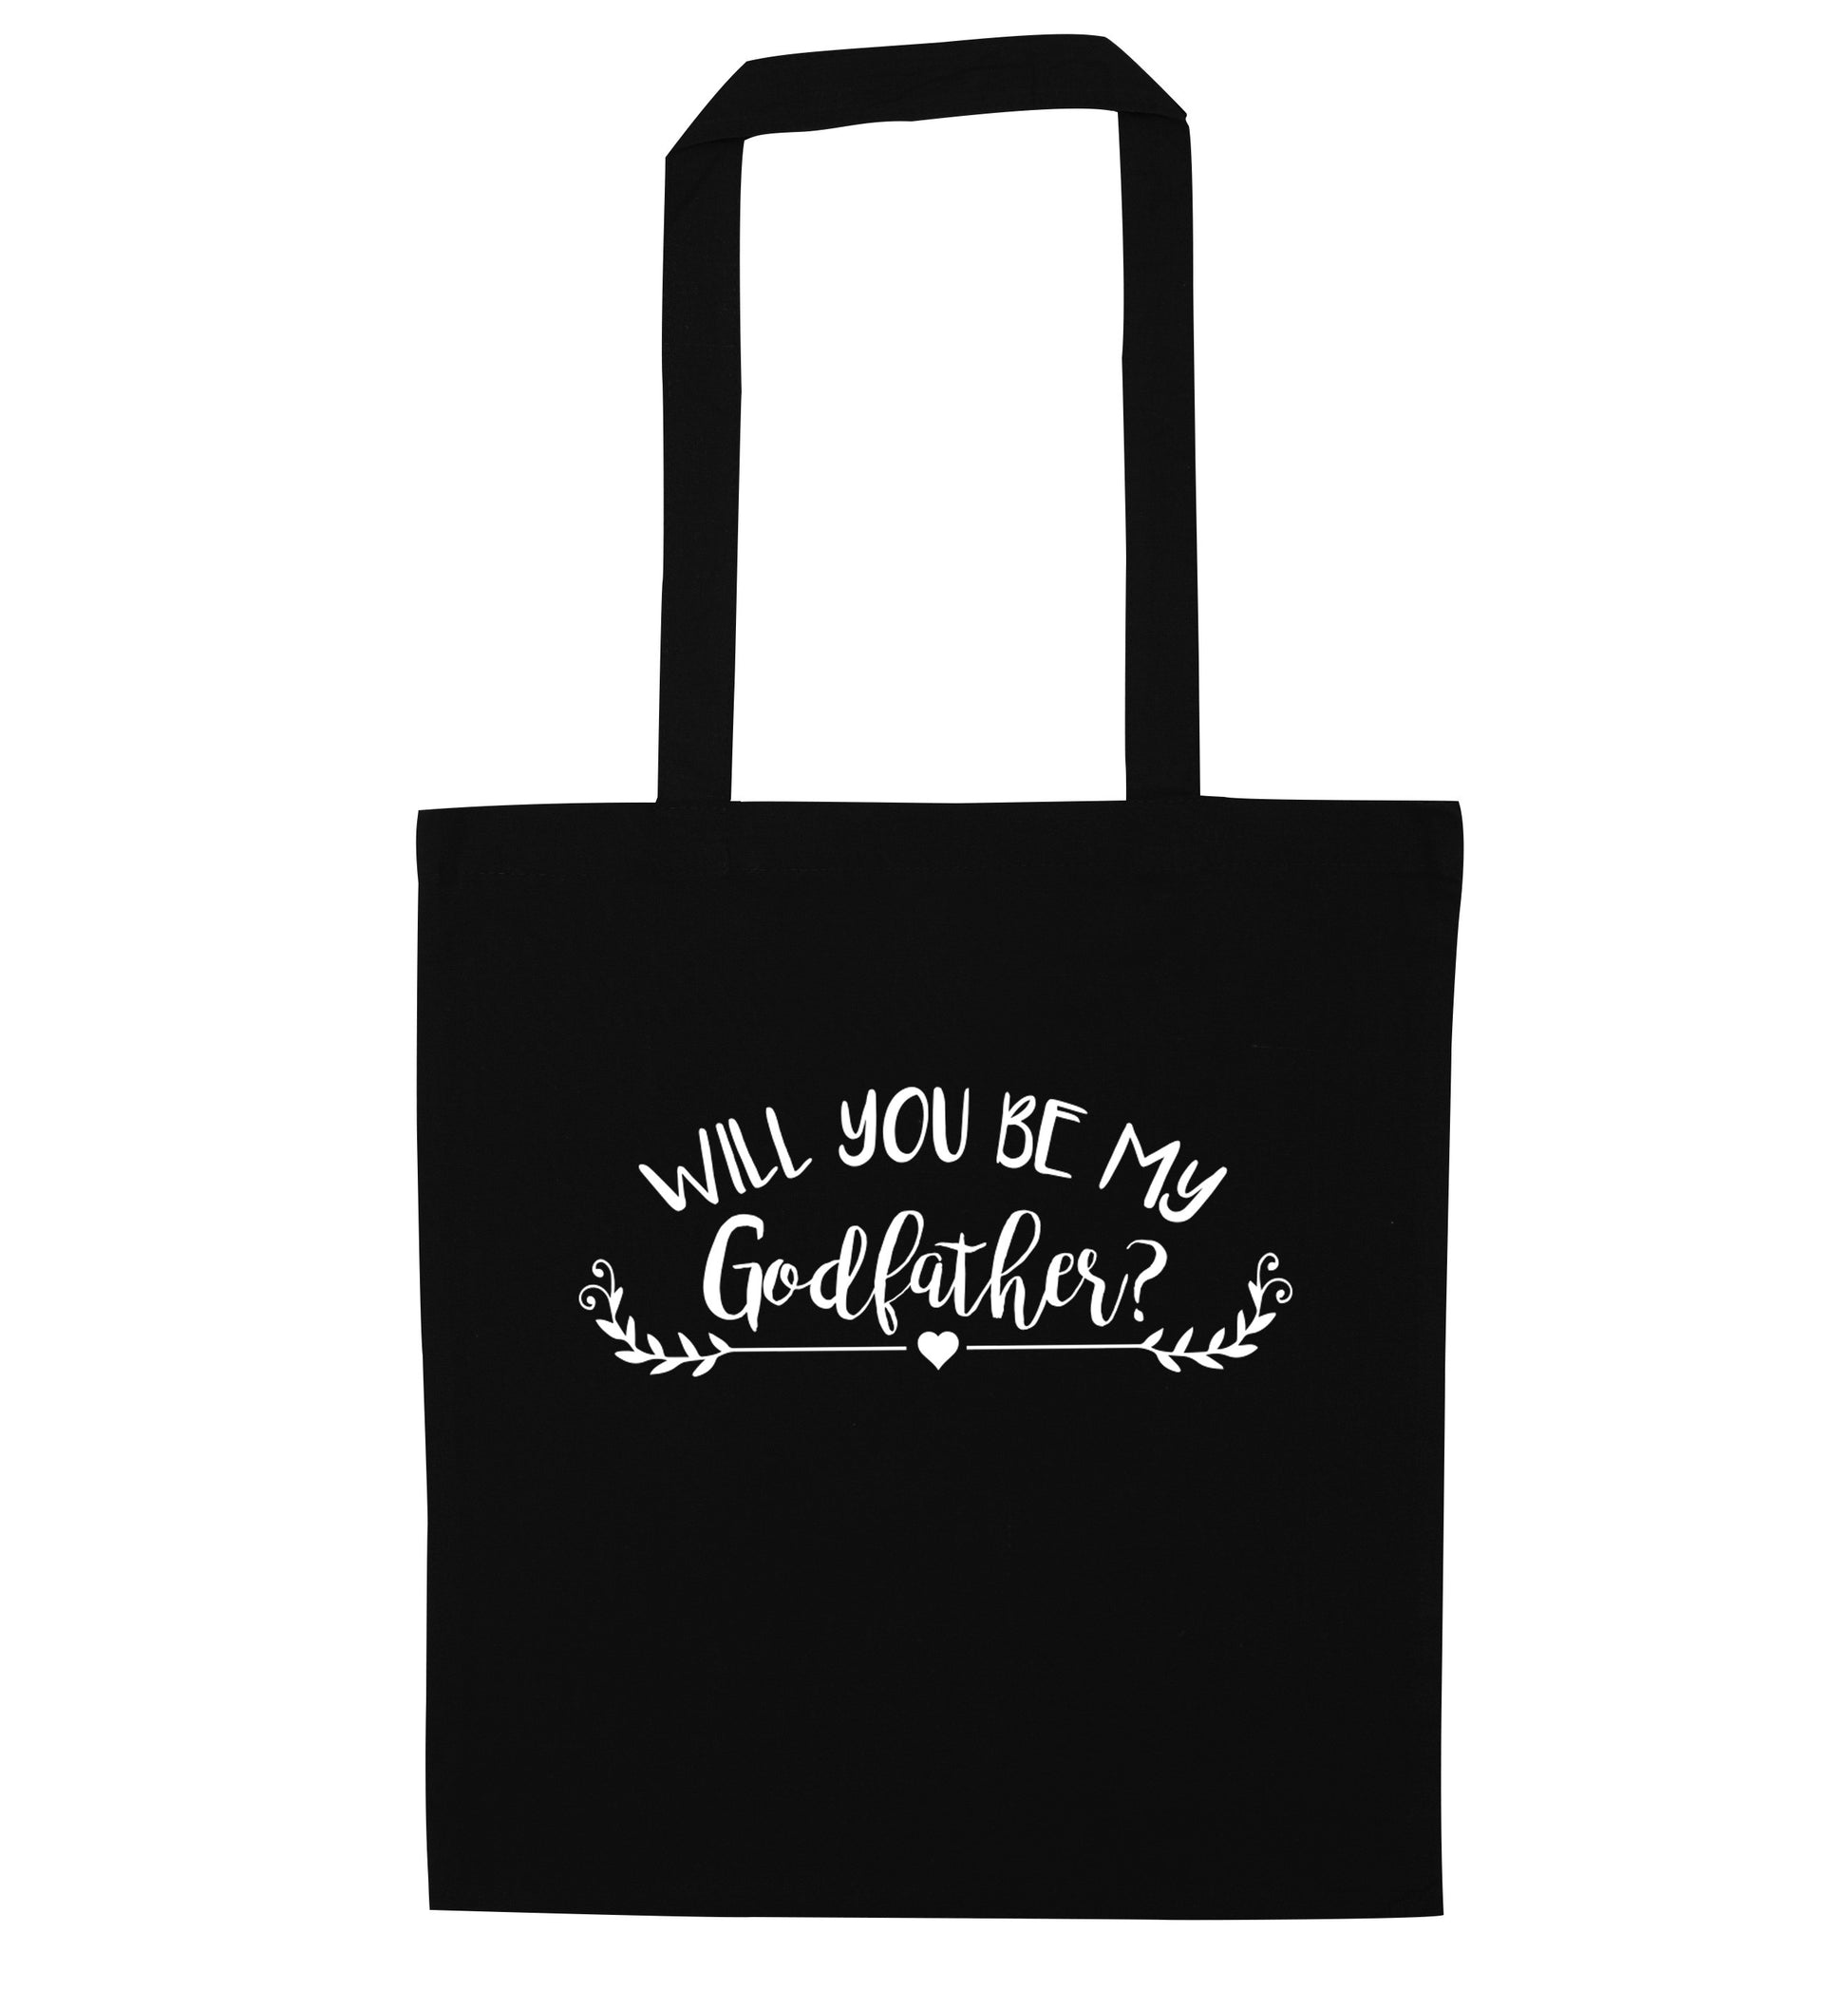 Will you be my godfather? black tote bag